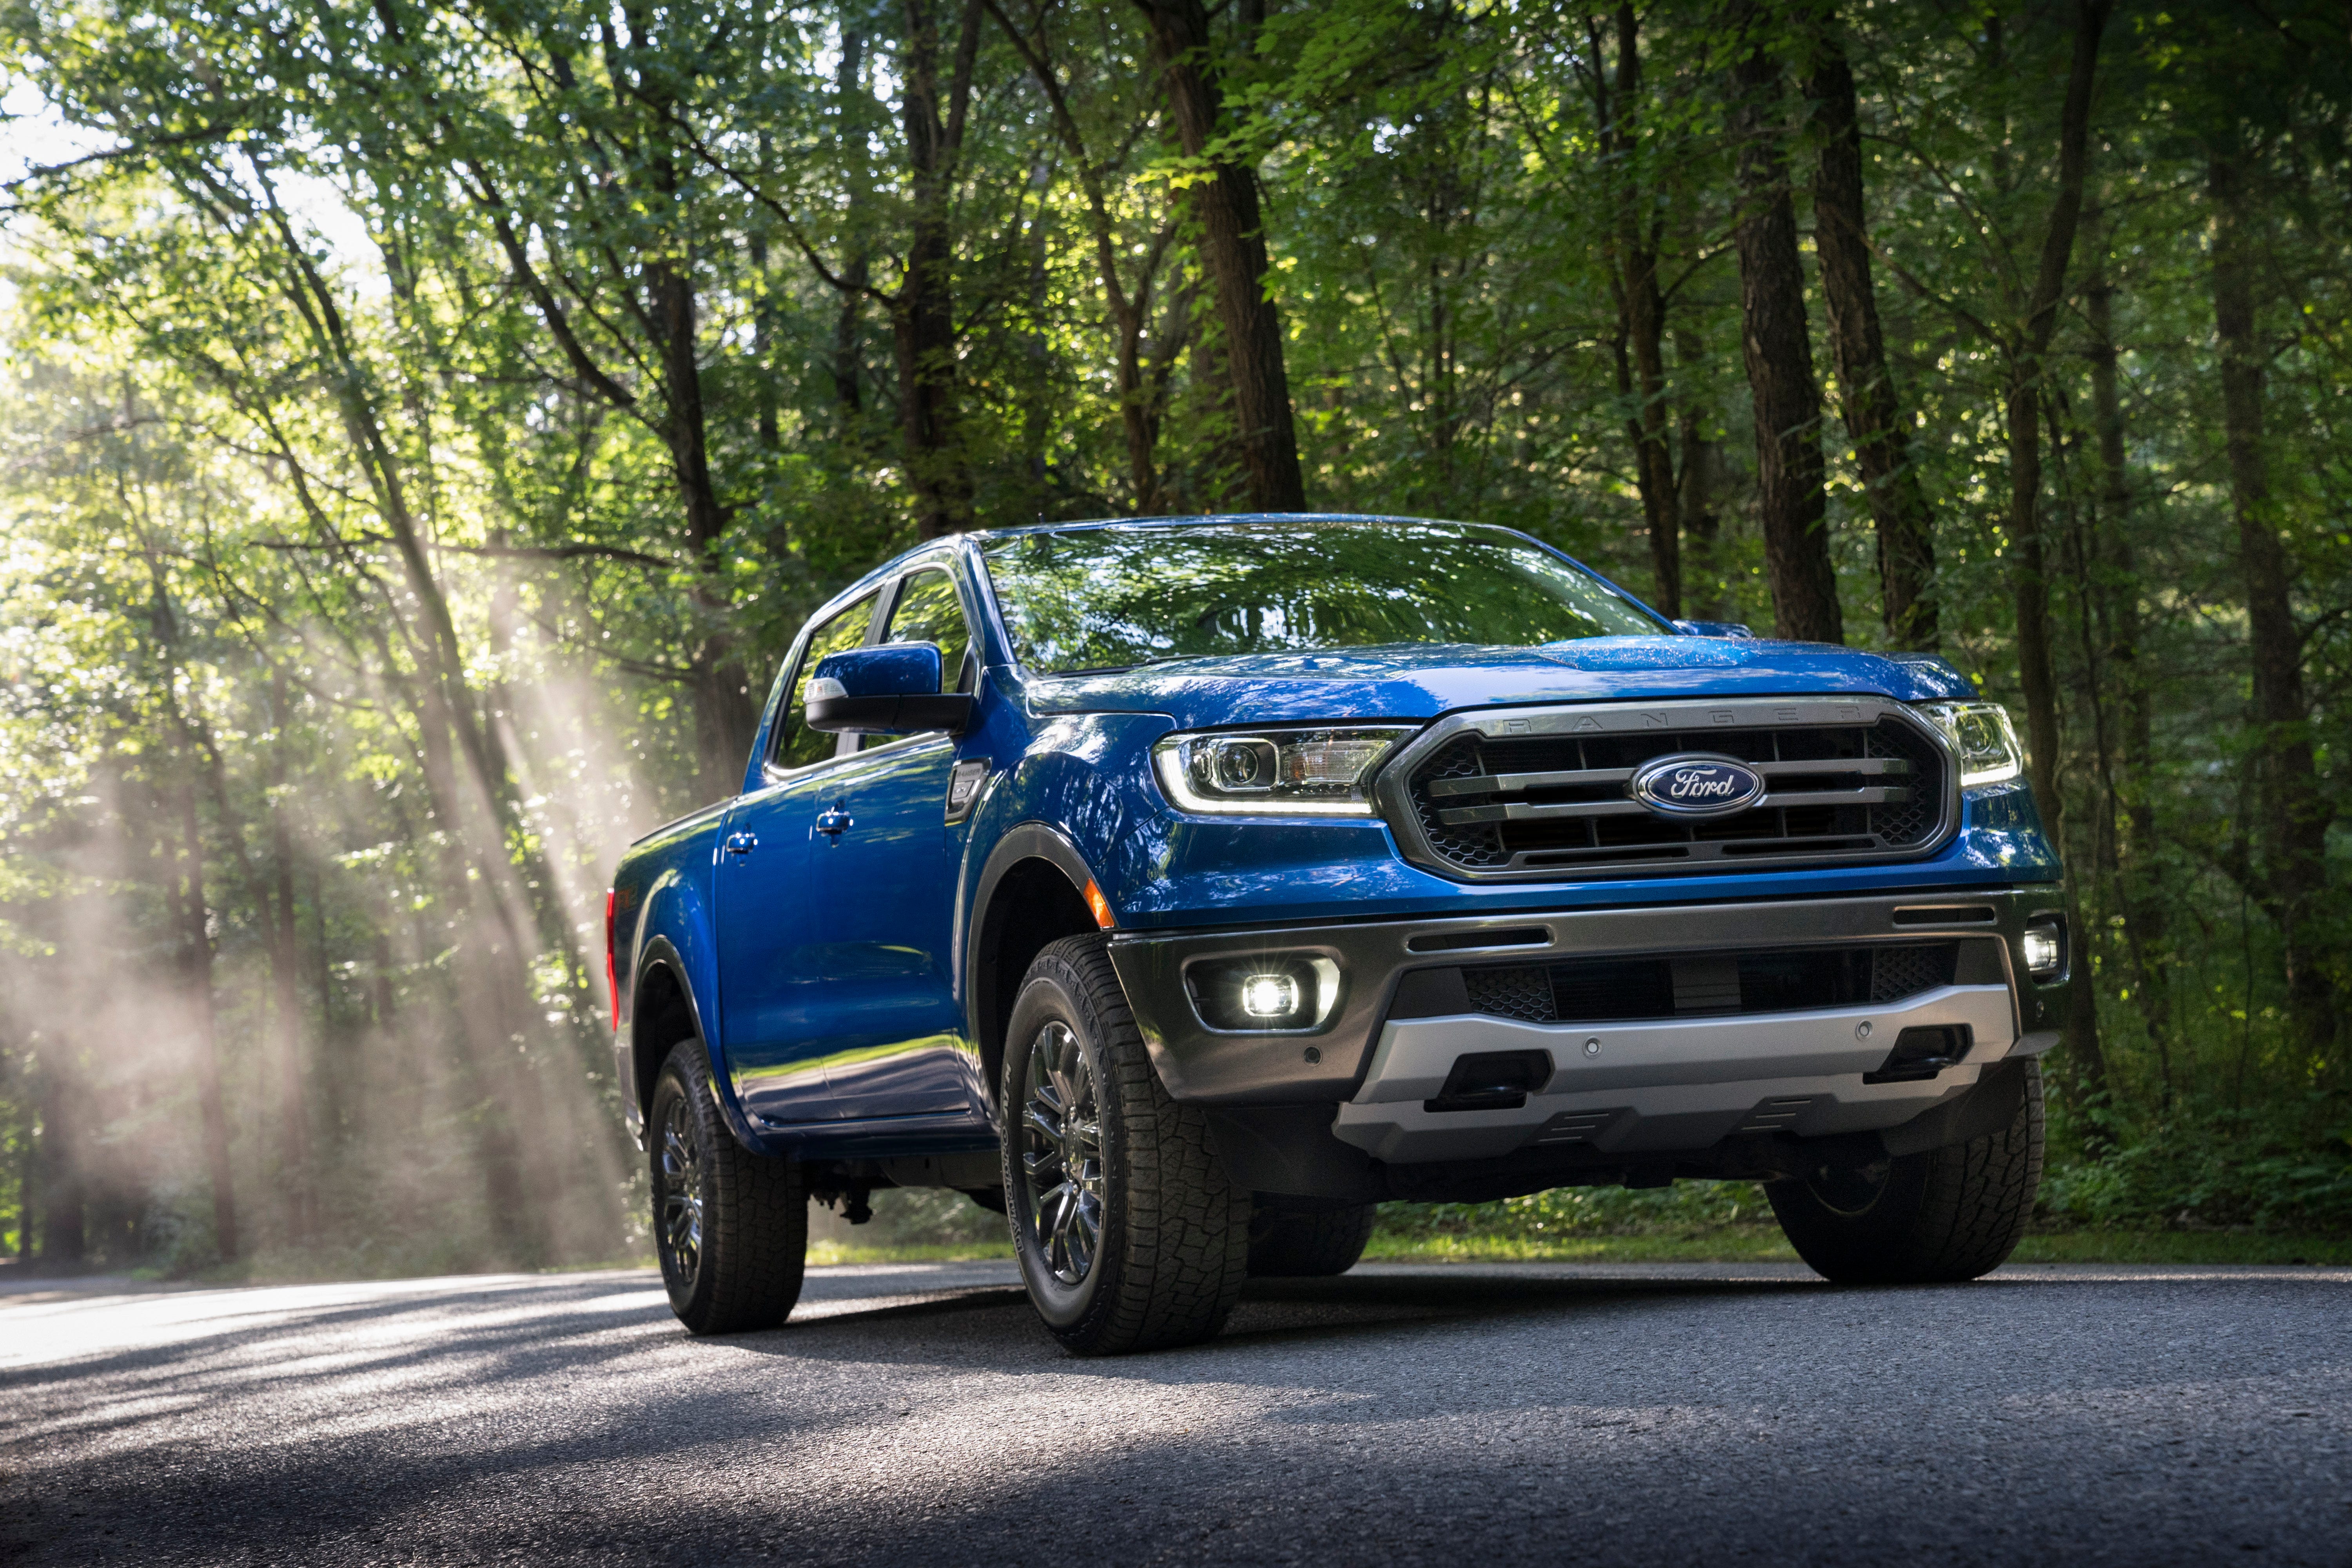 Ford Ranger, Jeep Cherokee, Tesla Model S top American-Made Index